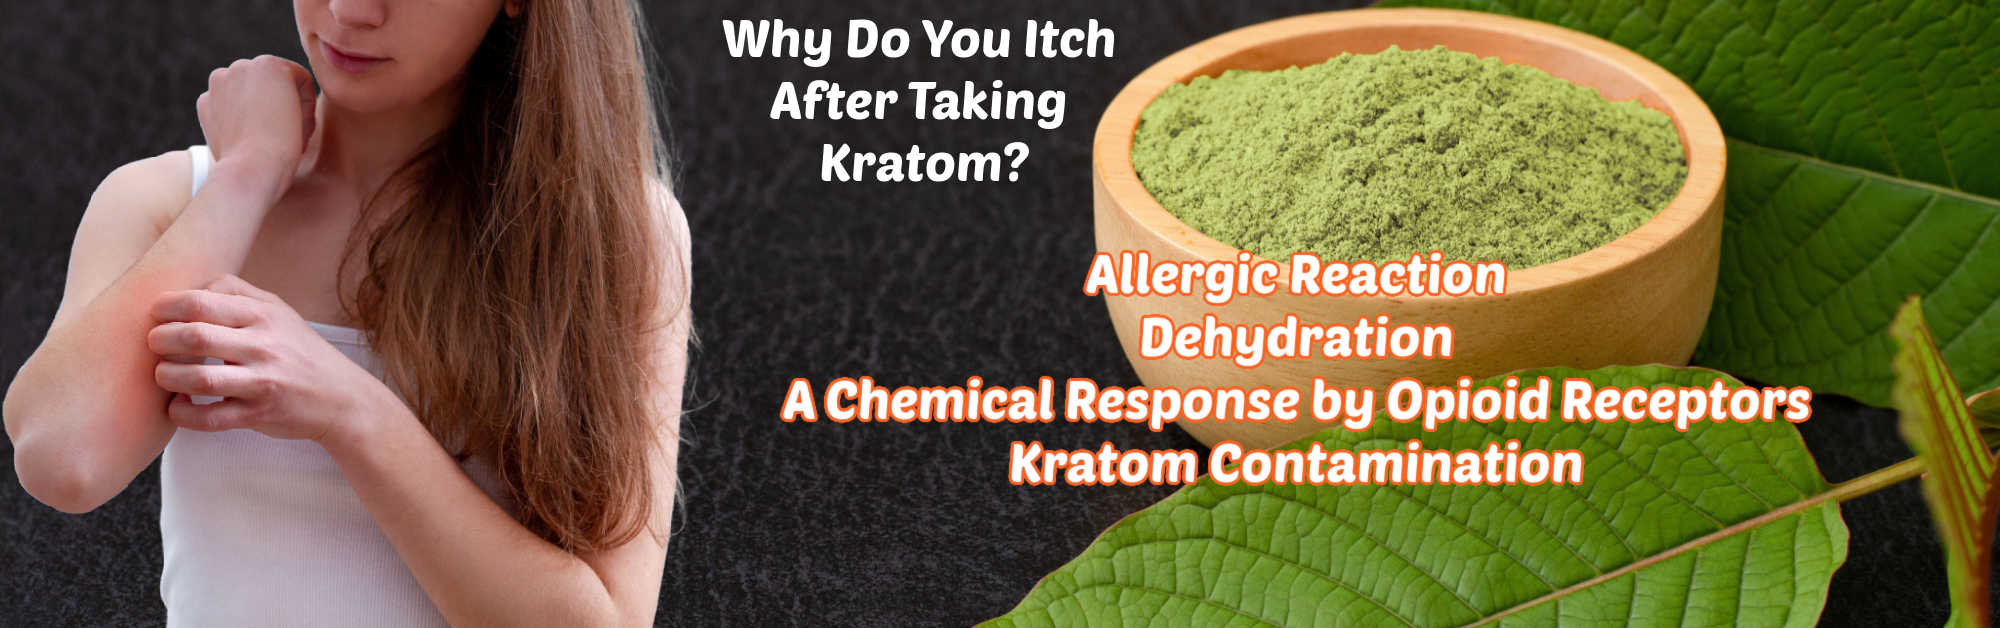 image of why do itch after talking kratom